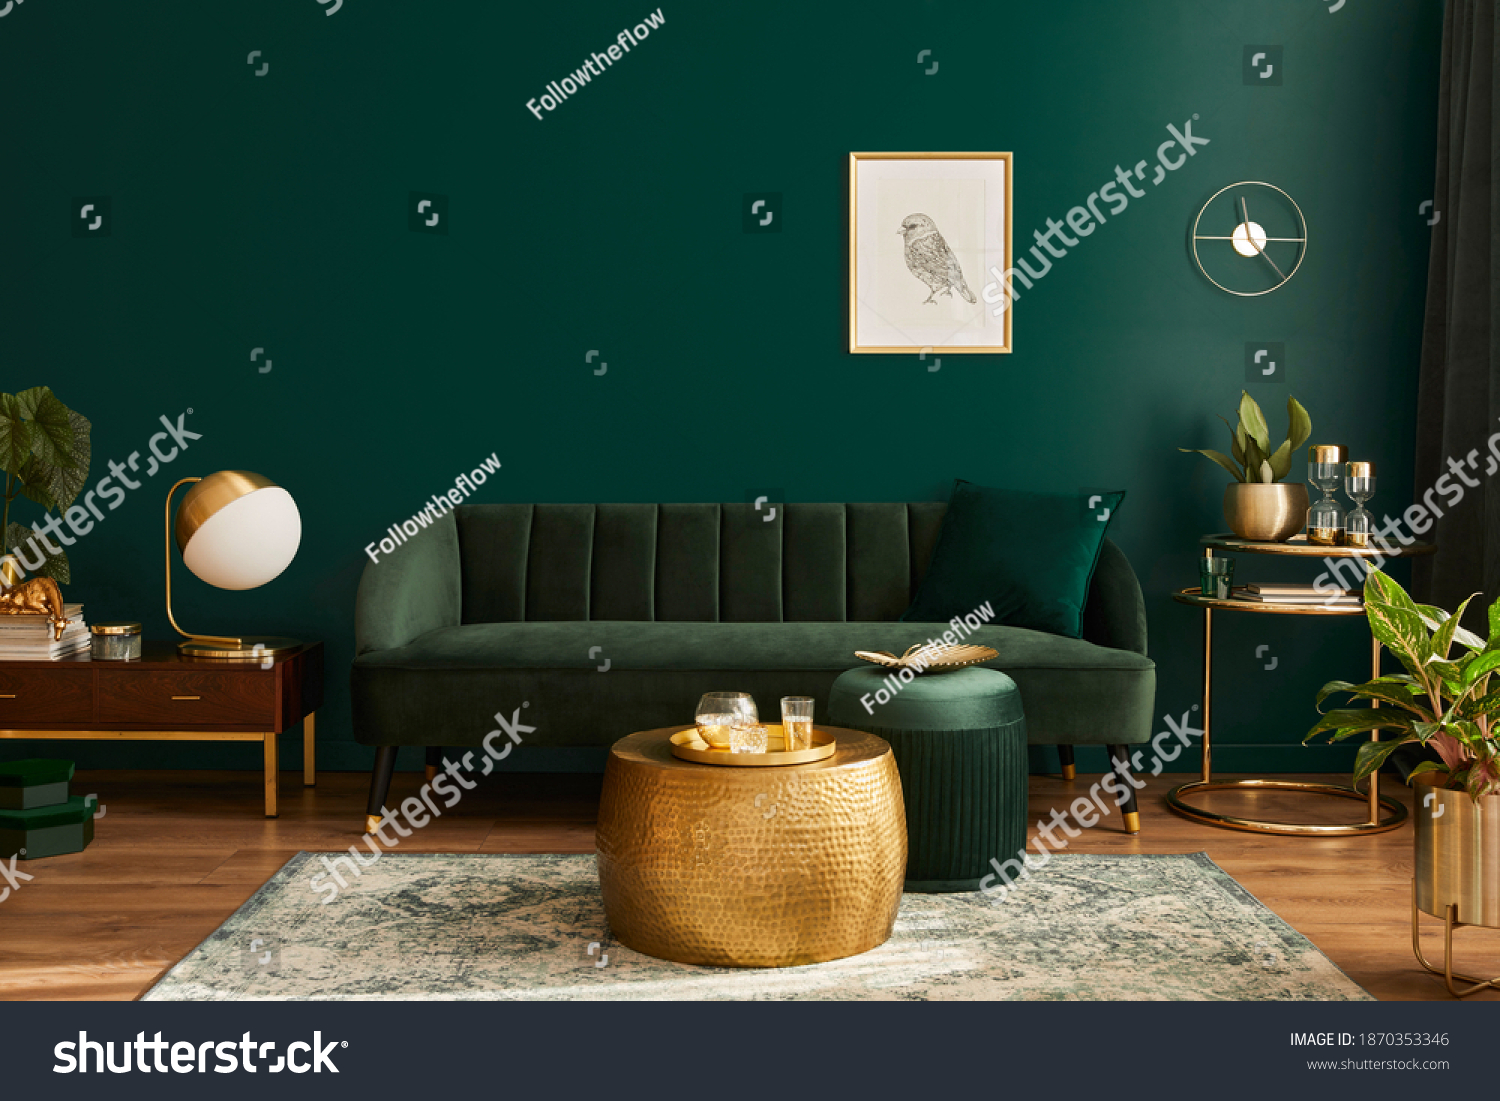 Luxury living room in house with modern interior design, green velvet sofa, coffee table, pouf, gold decoration, plant, lamp, carpet, mock up poster frame and elegant accessories. Template.  #1870353346